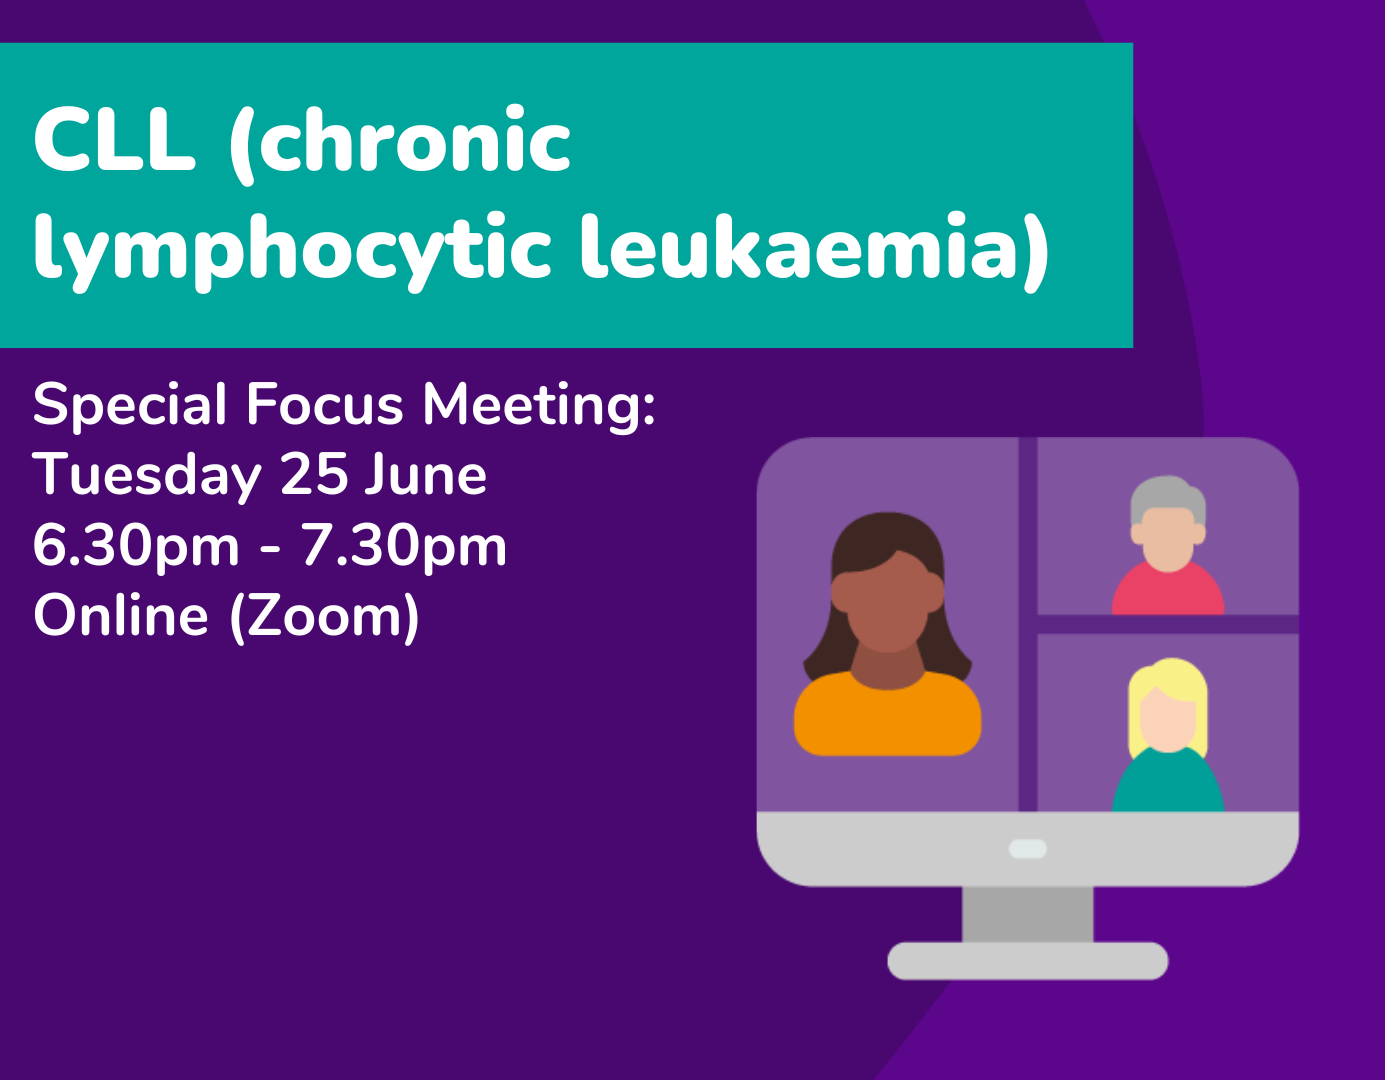 CLL Special focus meeting Tuesday 25 June 6.30pm - 7.30pm online (Zoom)